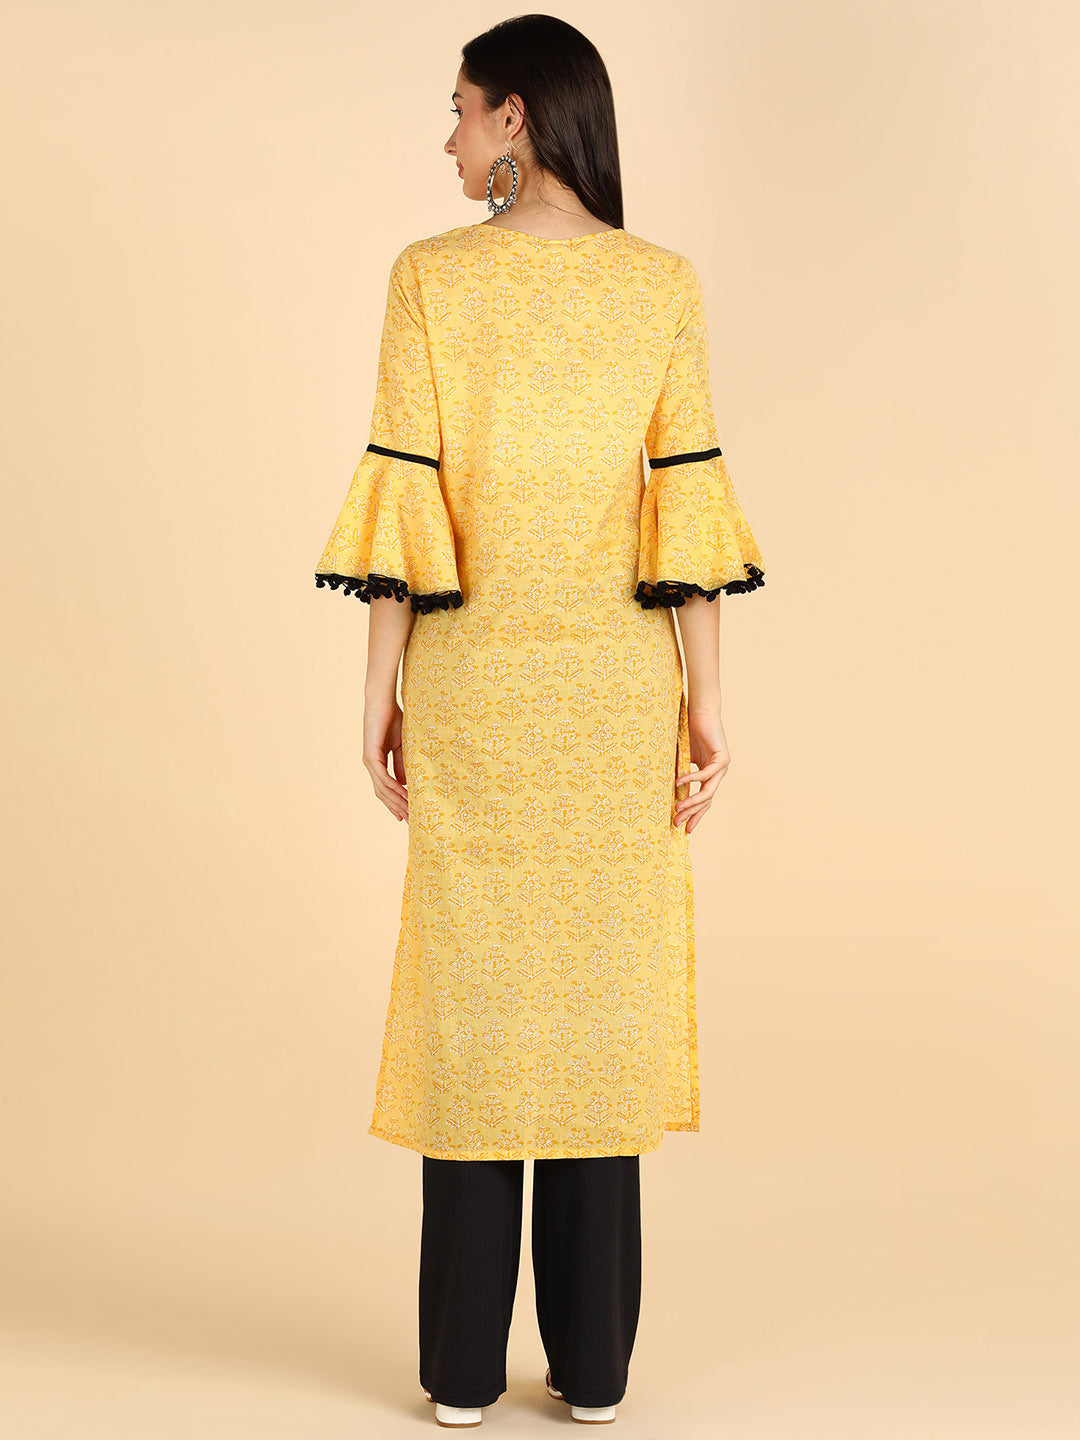 Floral Printed Straight Yellow Kurta With Sleeve Detailing